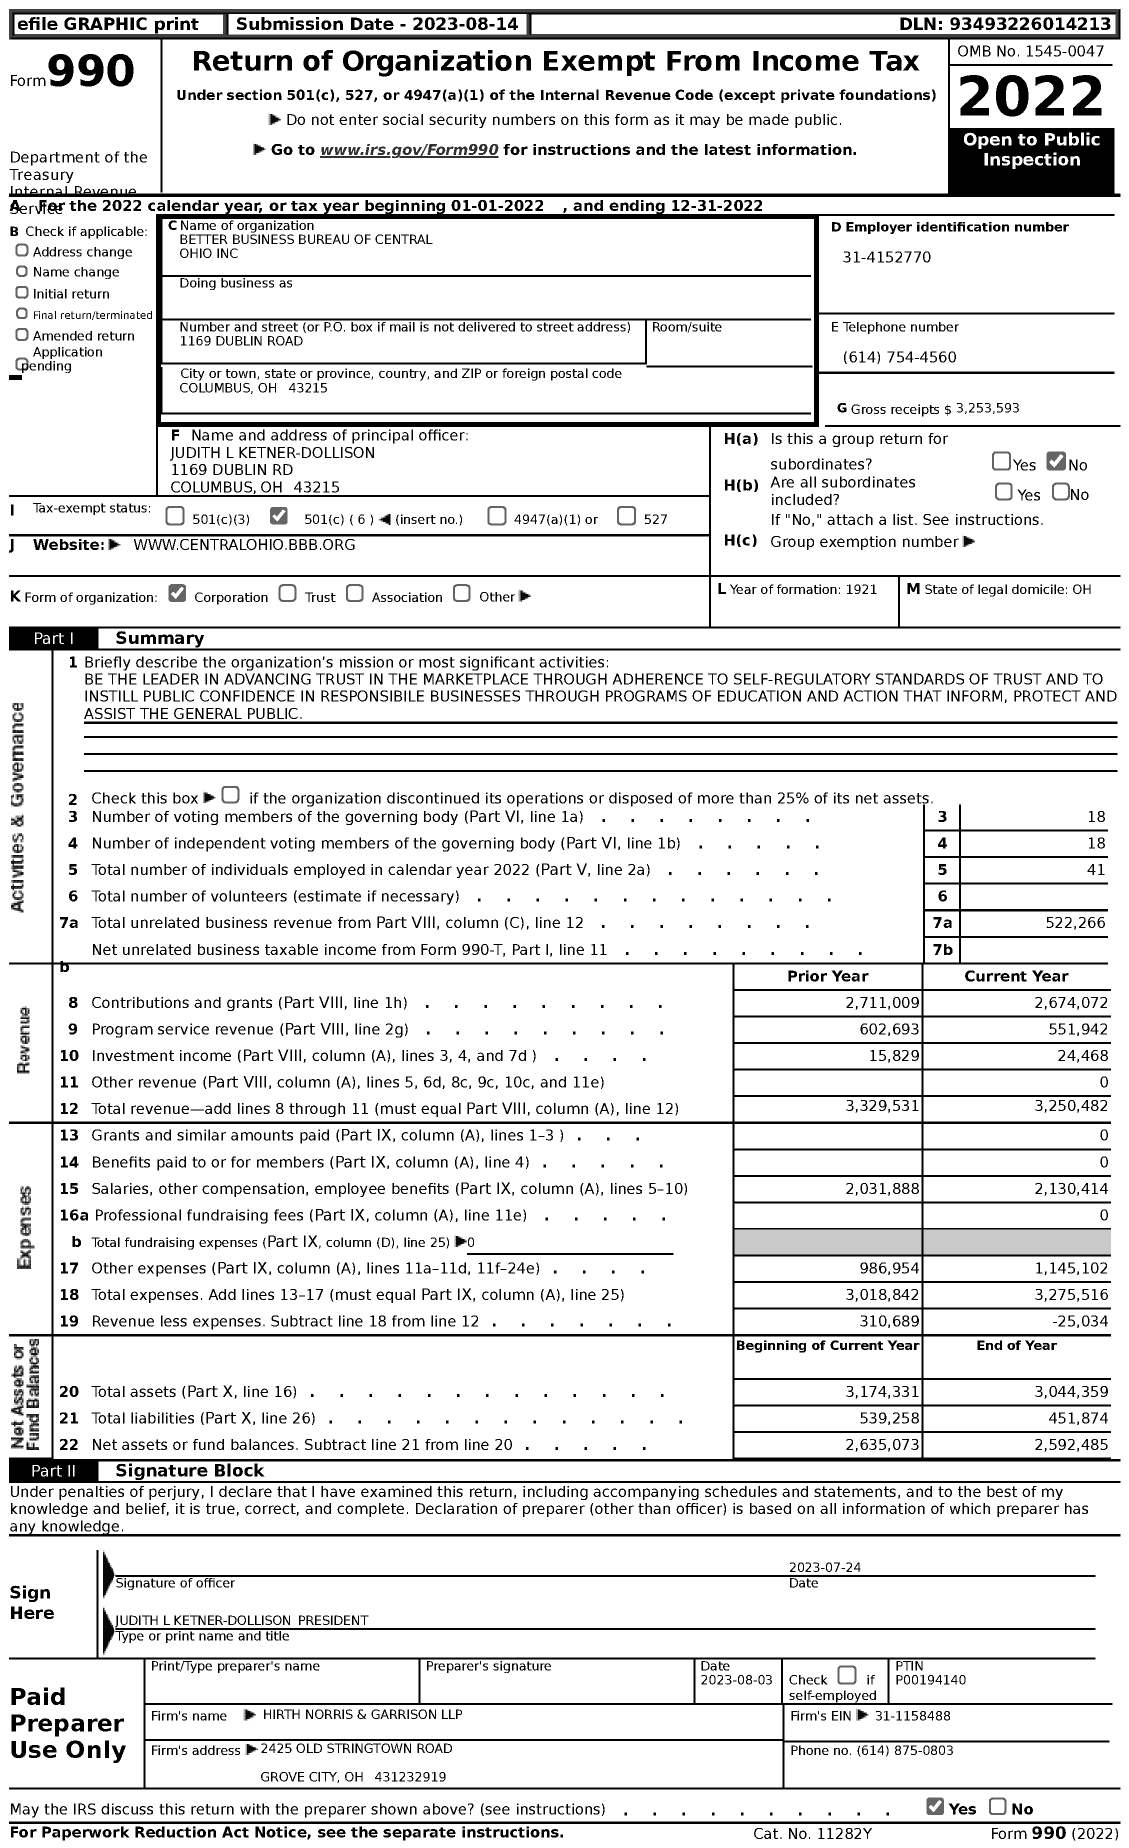 Image of first page of 2022 Form 990 for Better Business Bureau of Central Ohio (BBB)